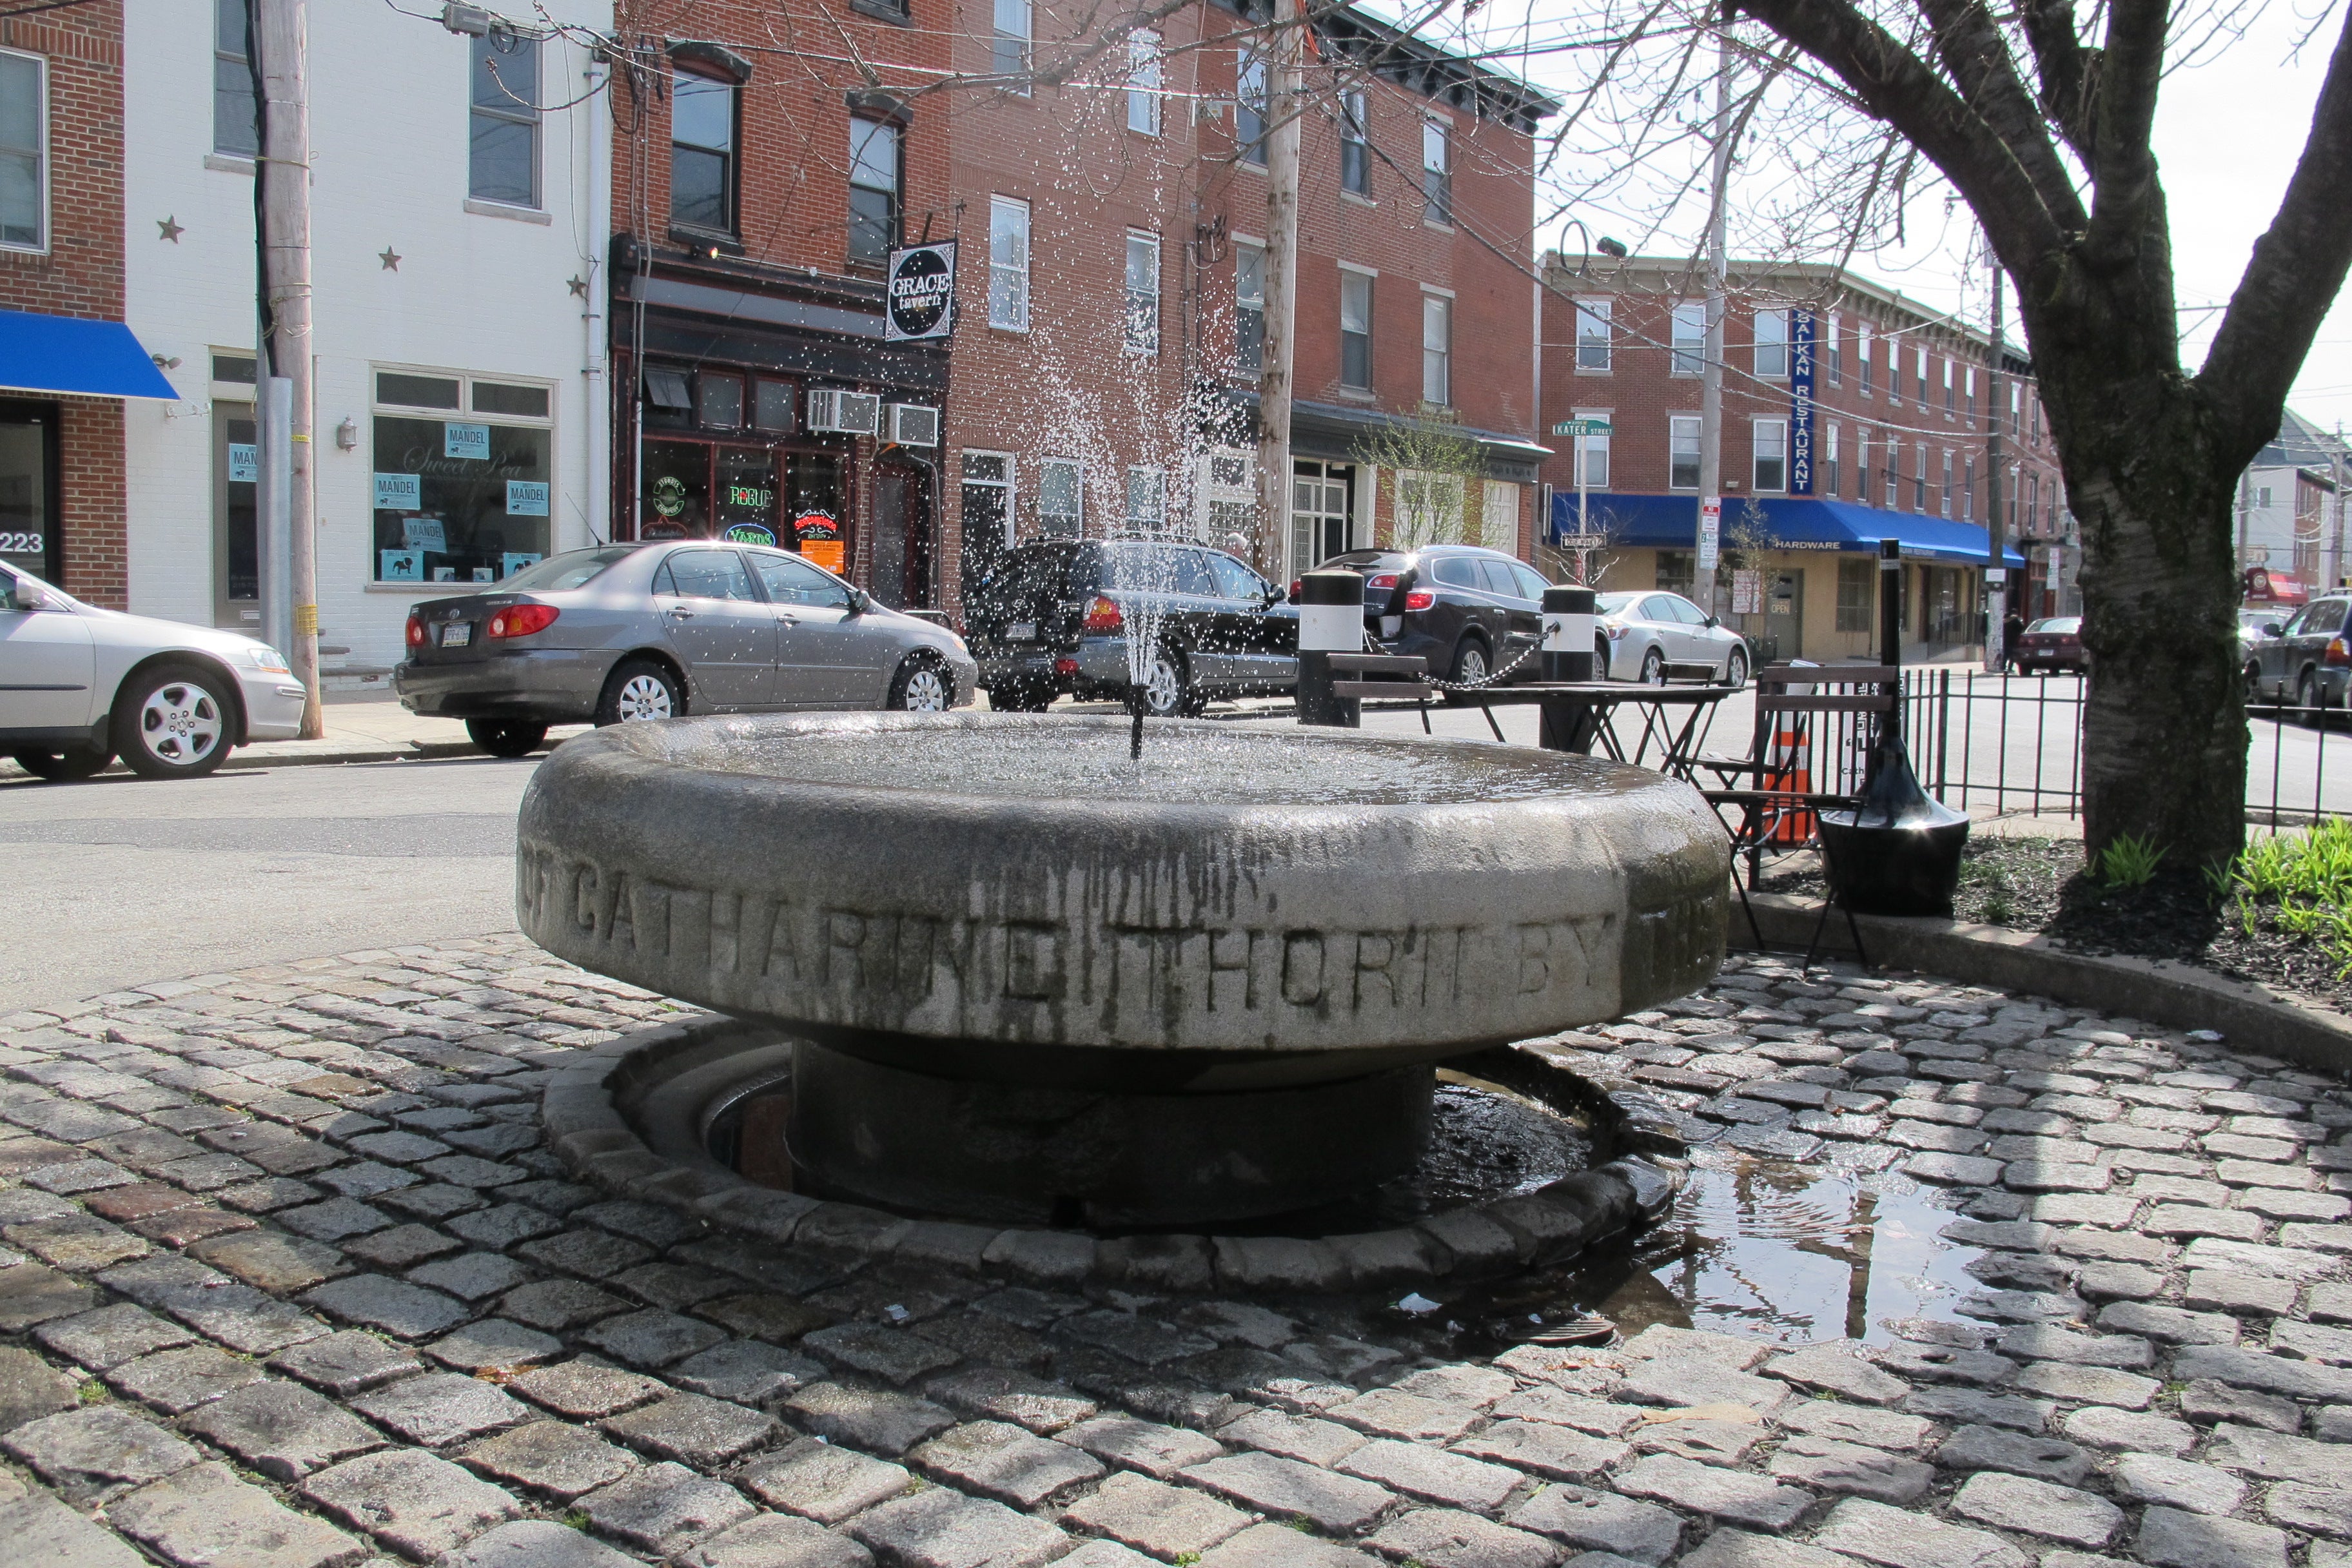 Catharine Thorn fountain at Grays Ferry, South and 23rd Streets recently had its water restored.